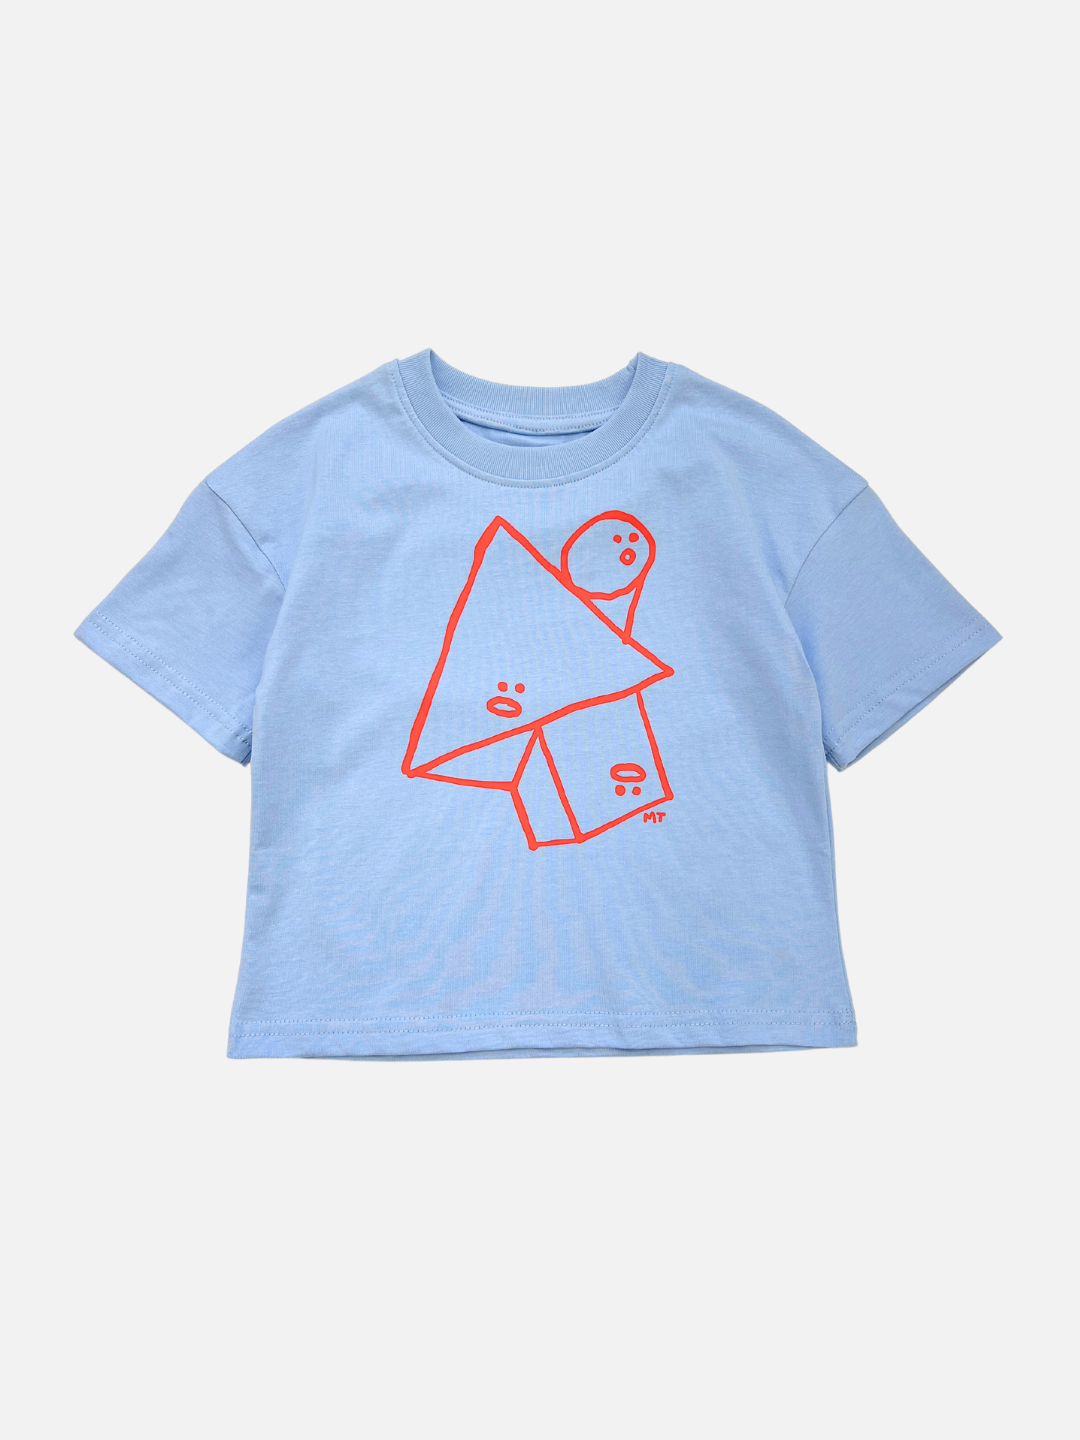 Sky Blue | A front view of the kids' Jumble Tee with red shapes outline with funny faces in the center.